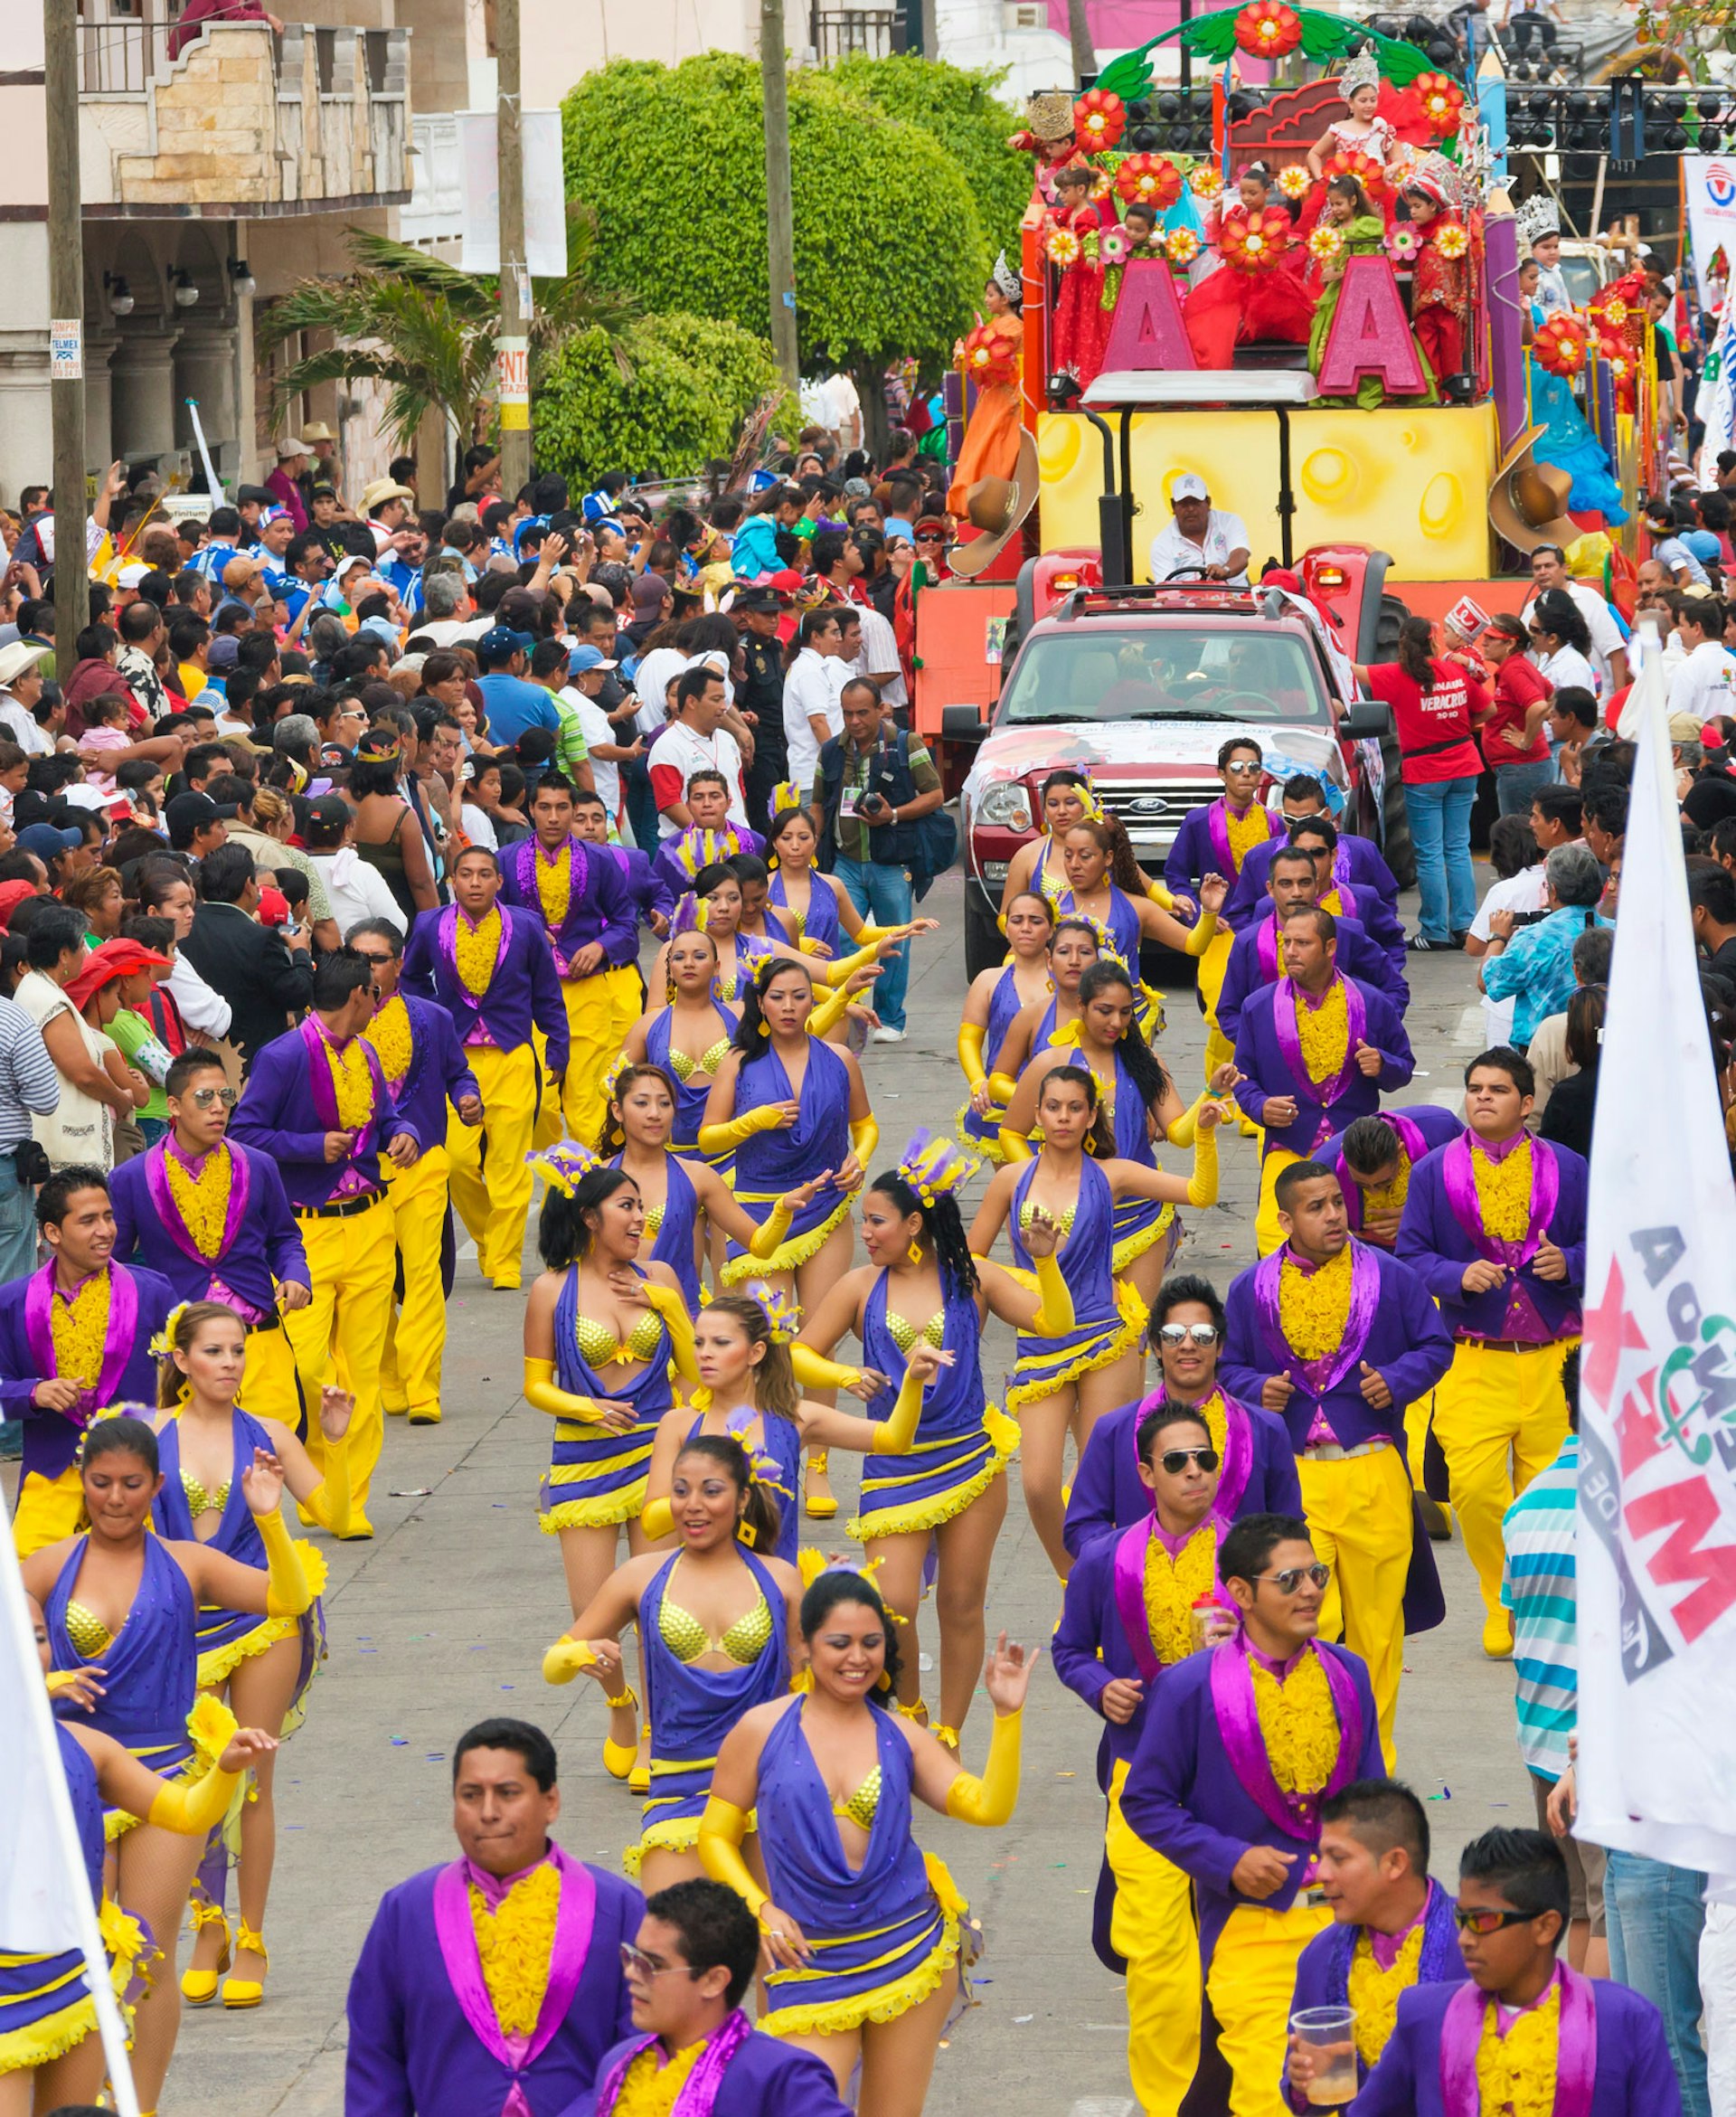 People in yellow and purple costumes dance in a parade